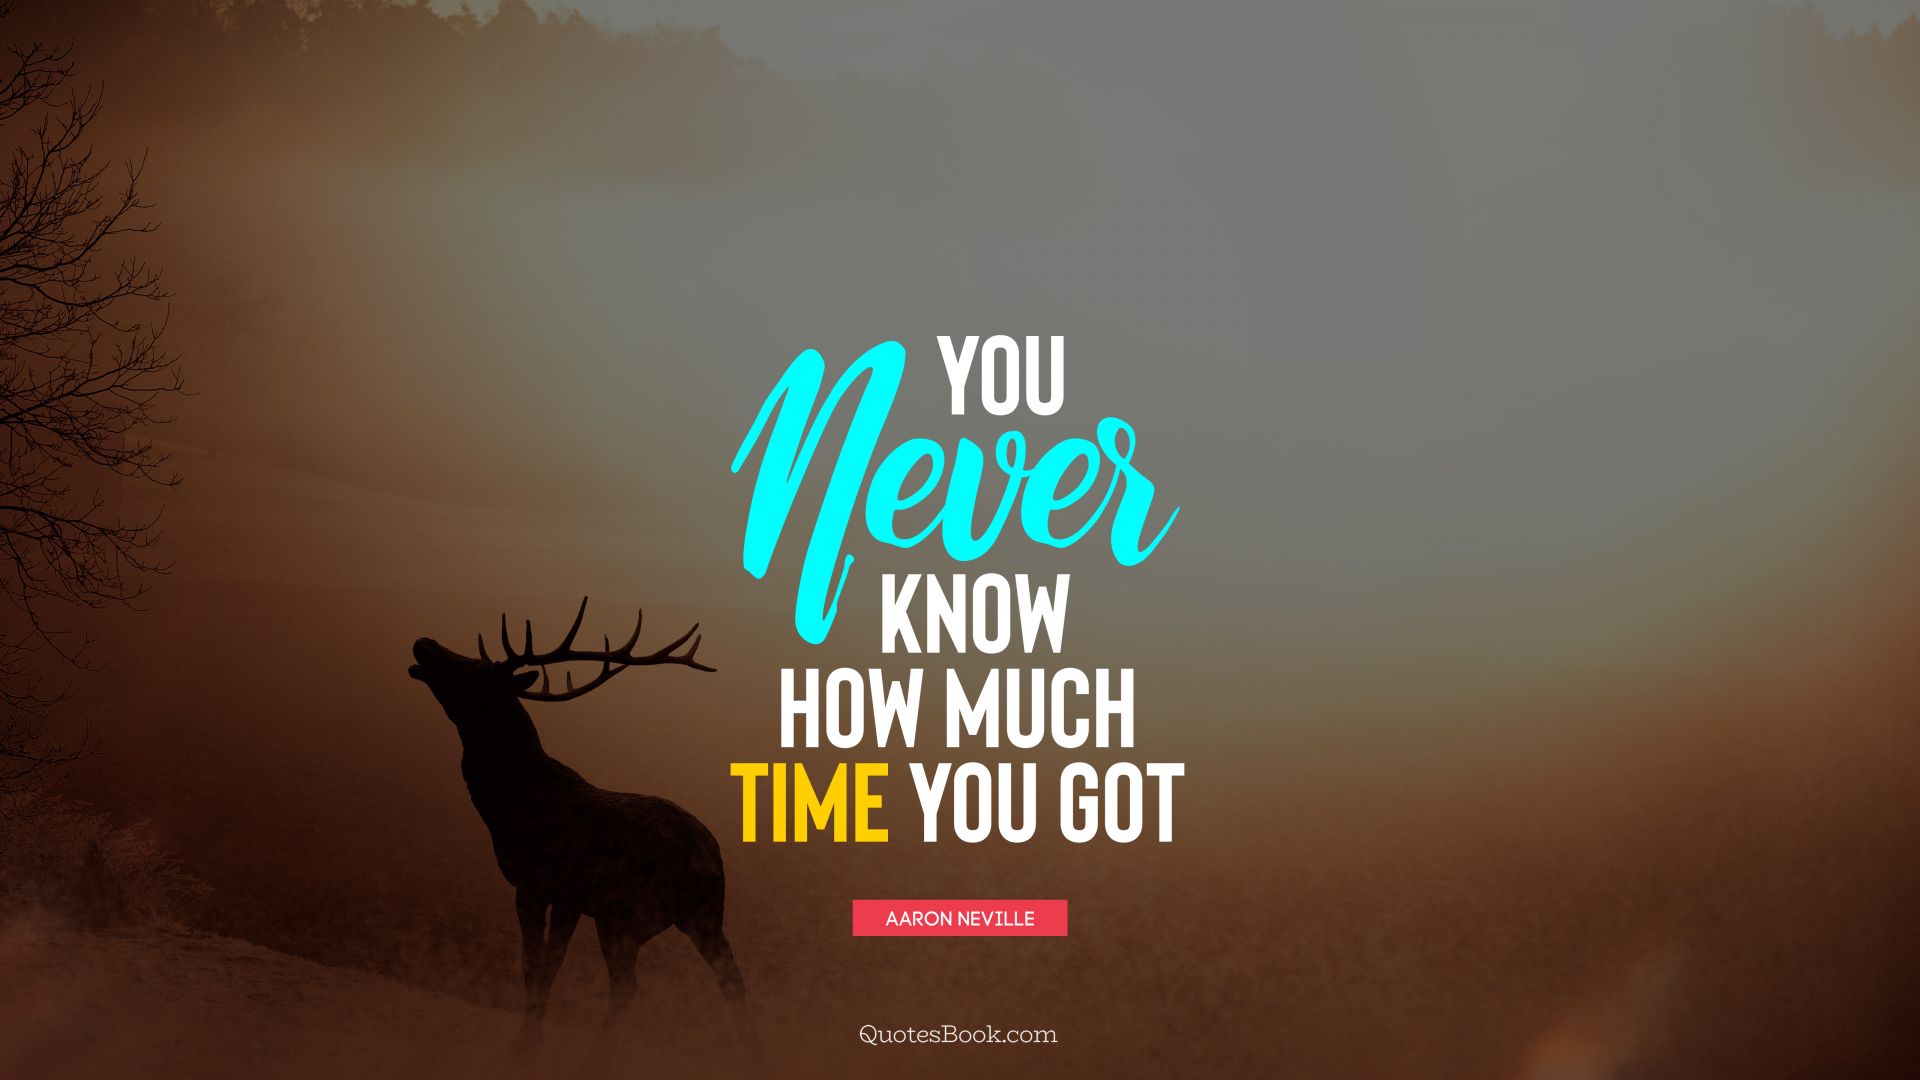 You never know how much time you got. - Quote by Aaron Neville